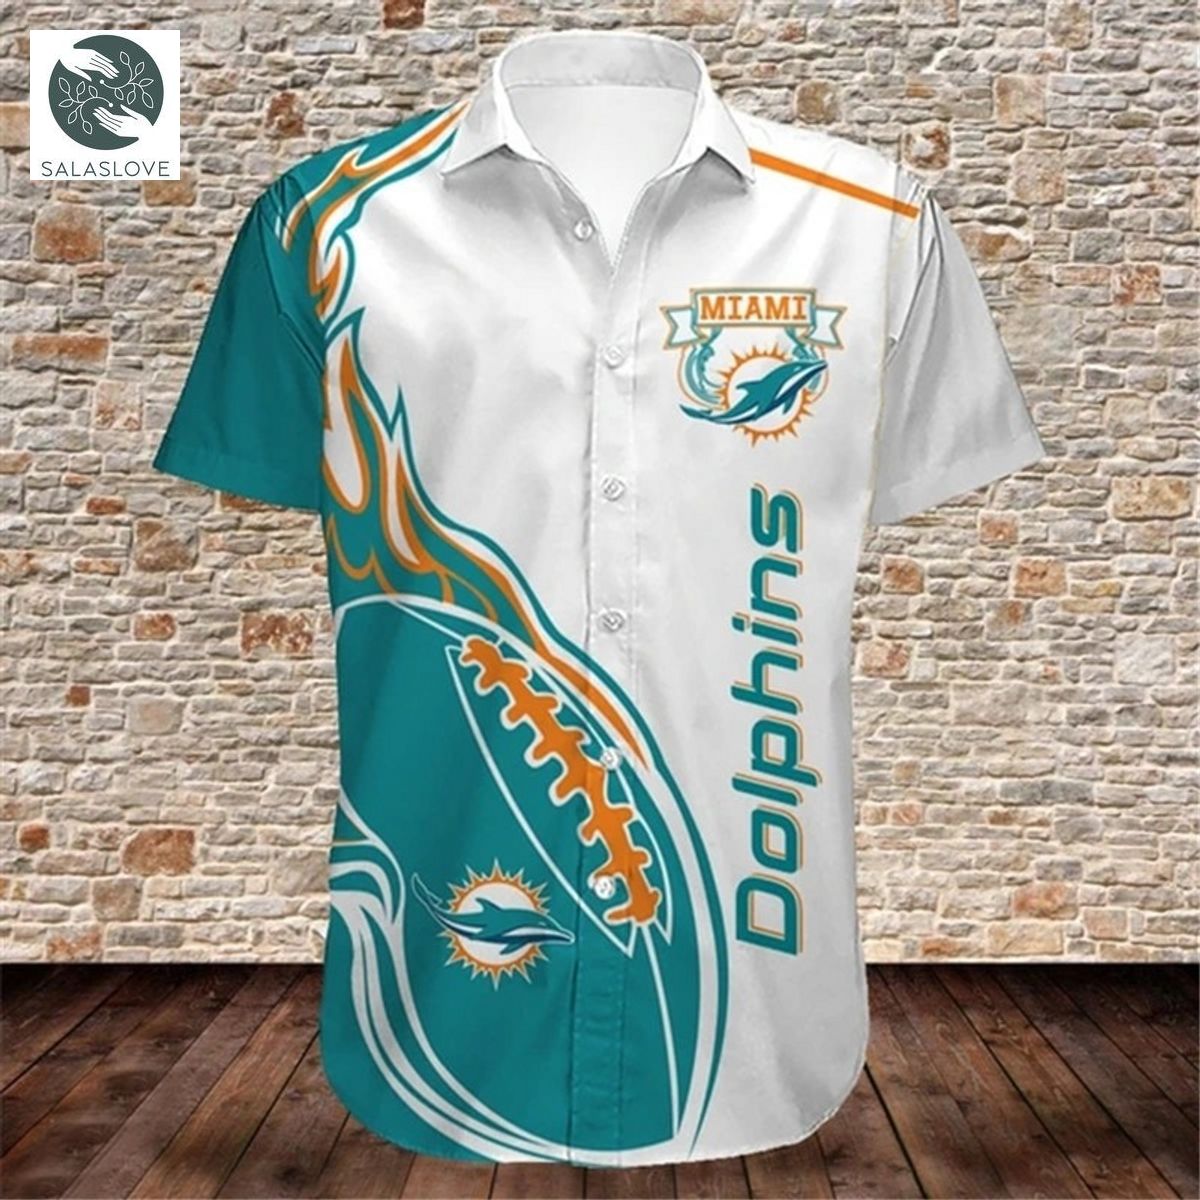 Miami Dolphins Shirts Cute Flame Balls graphic gift for men